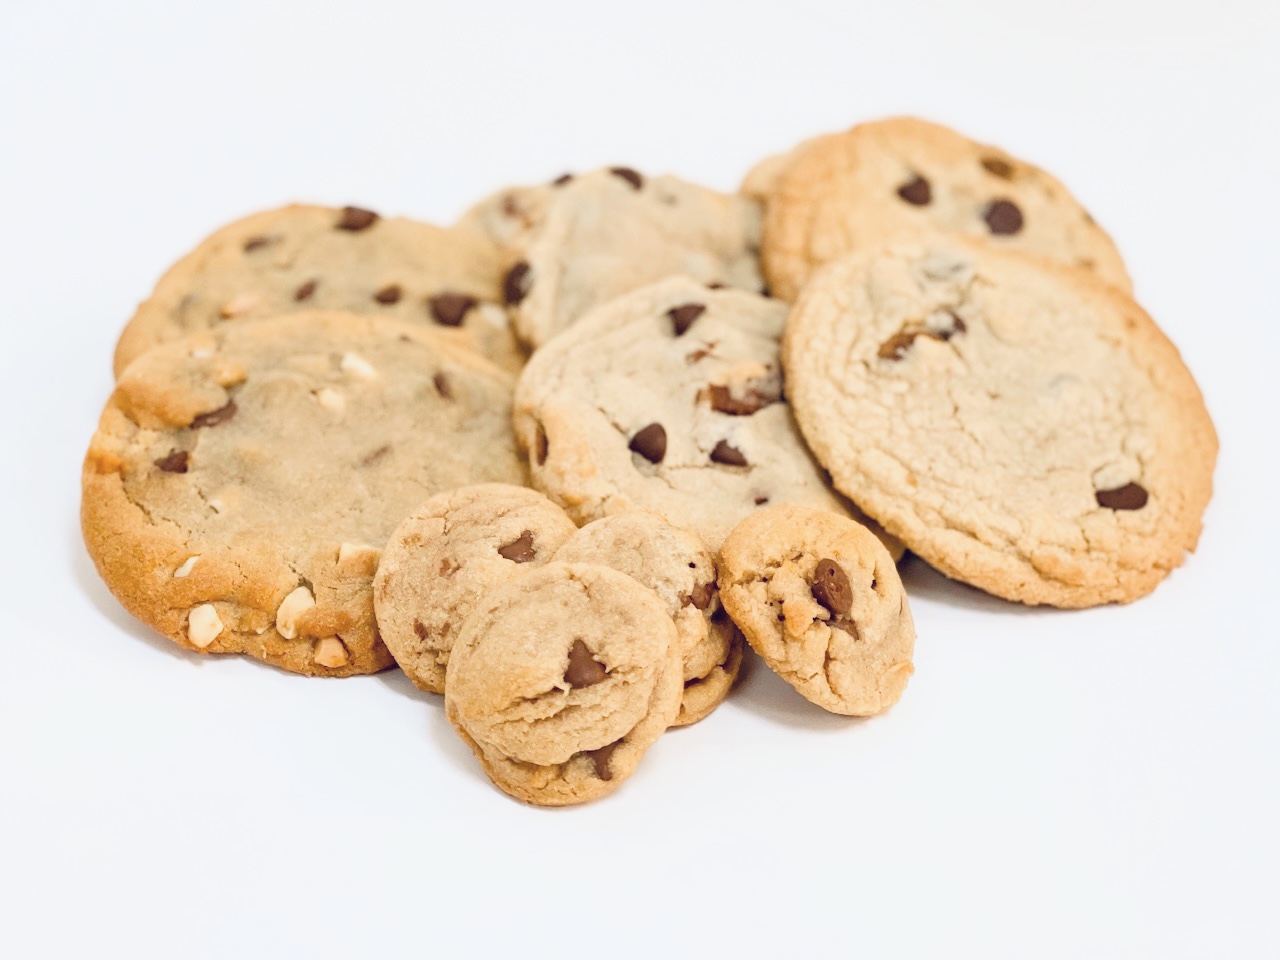 Cookies made with nuts and chocolate chips